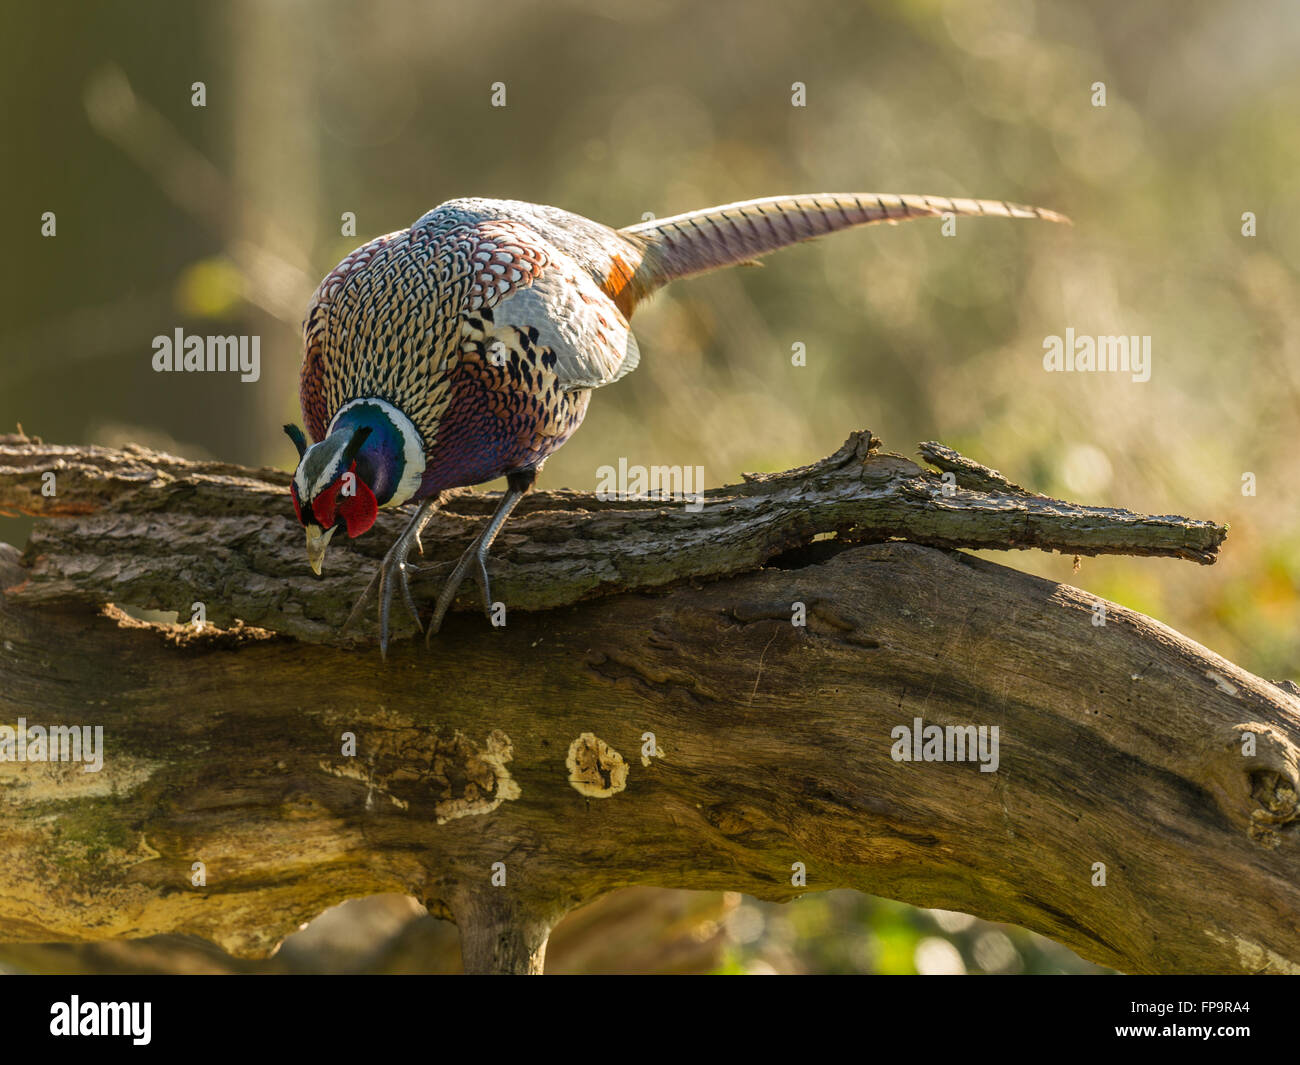 Beautiful British Ring-necked Pheasant (Phasianus colchicus) foraging in natural woodland forest setting. Stock Photo